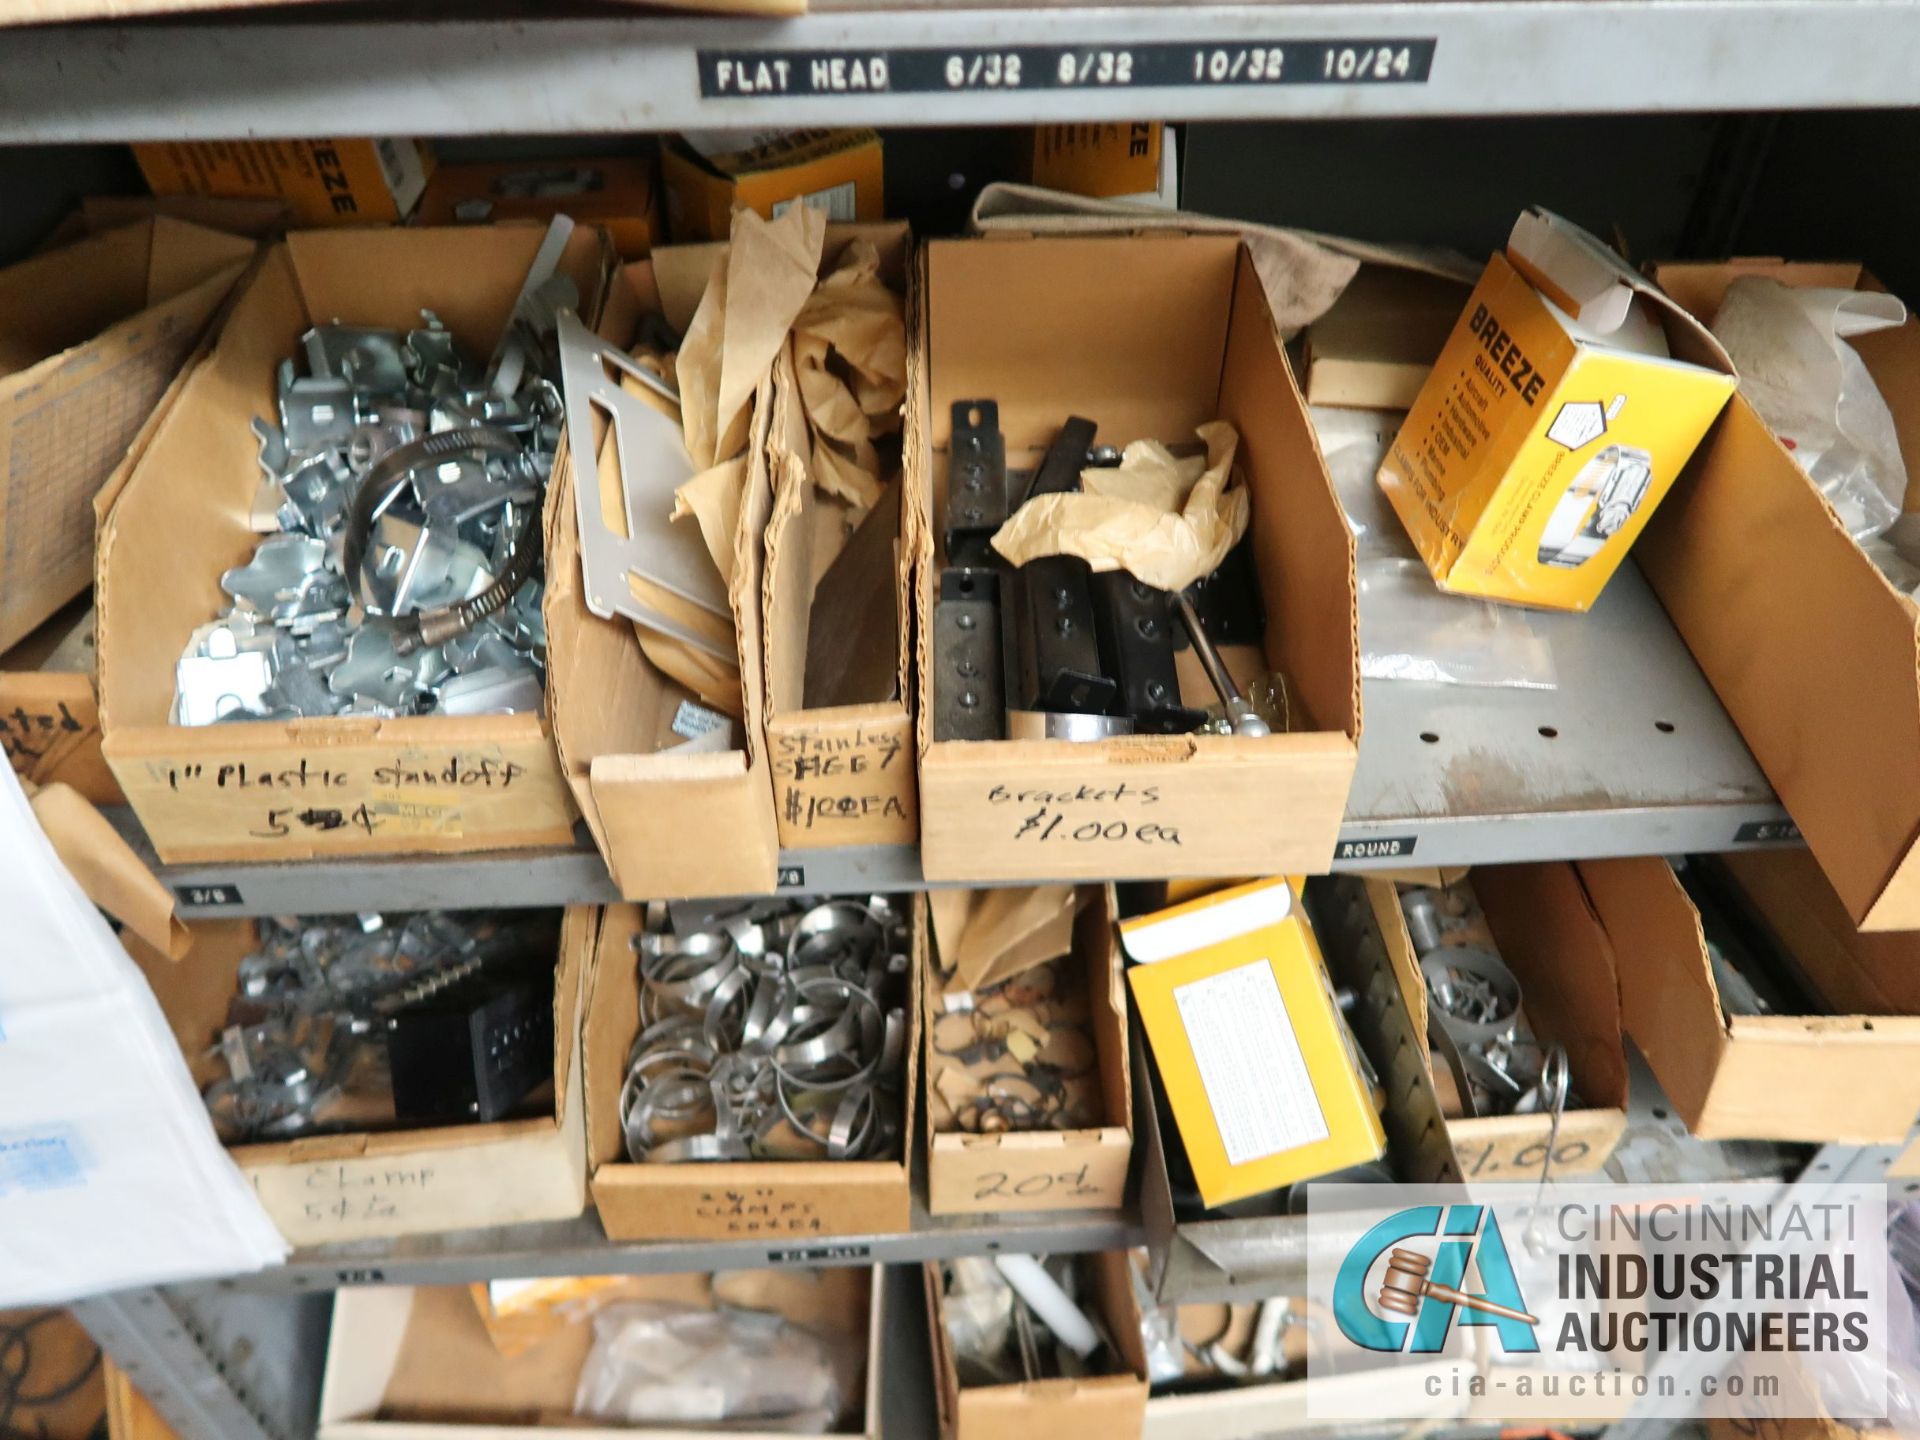 CONTENTS OF (7) SHELVES INCLUDING MISCELLANEOUS BRACKETS, CLAMPS, HINGES **NO SHELVES** - Image 16 of 19